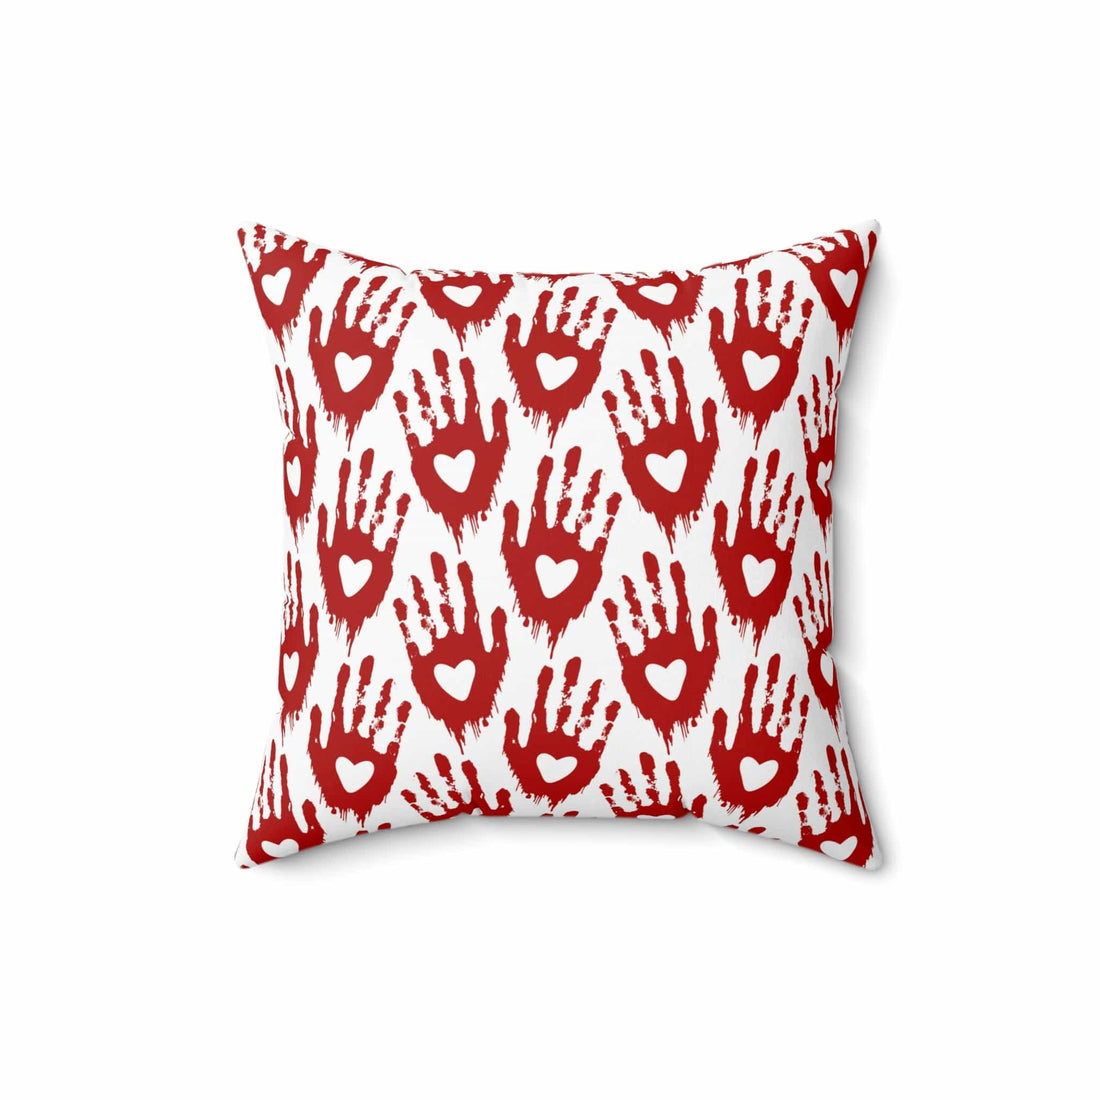 Kate McEnroe New York Halloween Pillow Case - Red Heart Hand Pattern Throw Pillow Covers 16&quot; × 16&quot; 3549431916